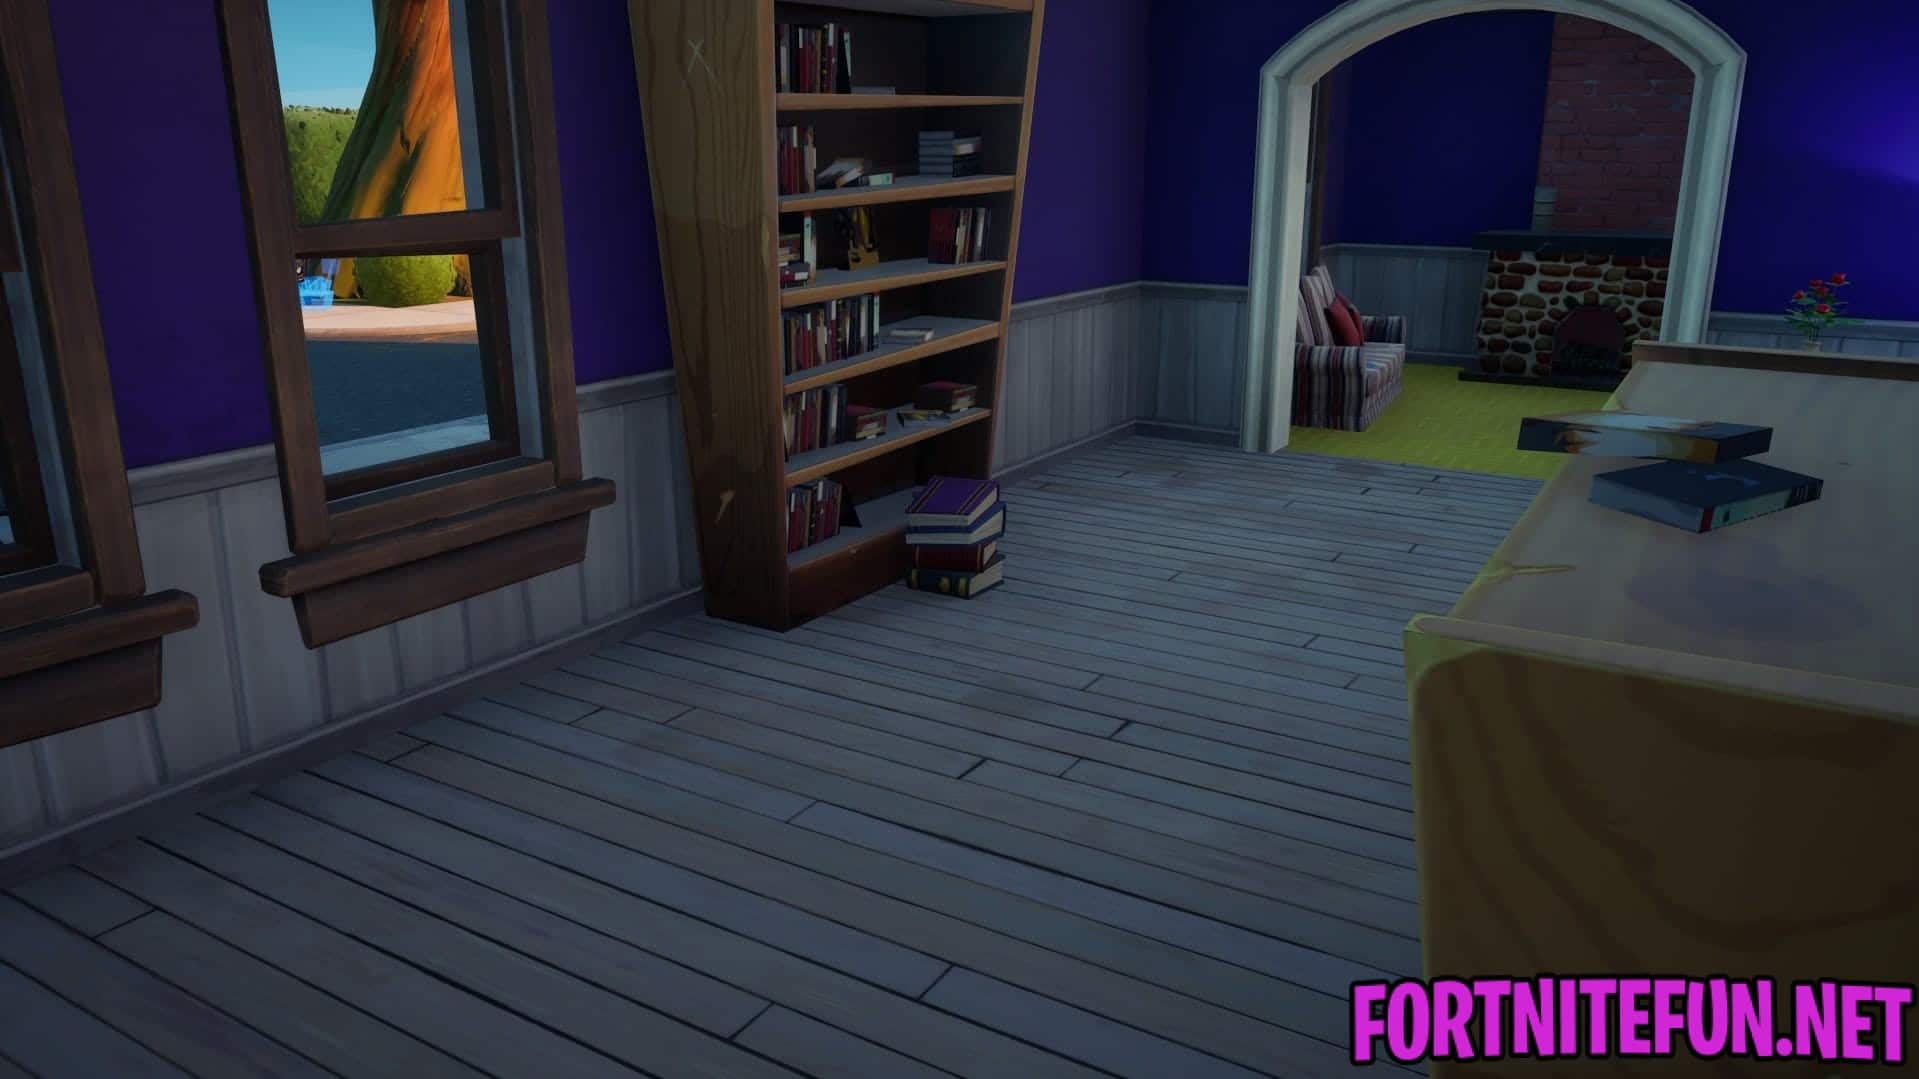 Collect Parenting Books from Holly Hatchery or Retail Row - Fortnite Chapter 2 Season 7 legendary challenge